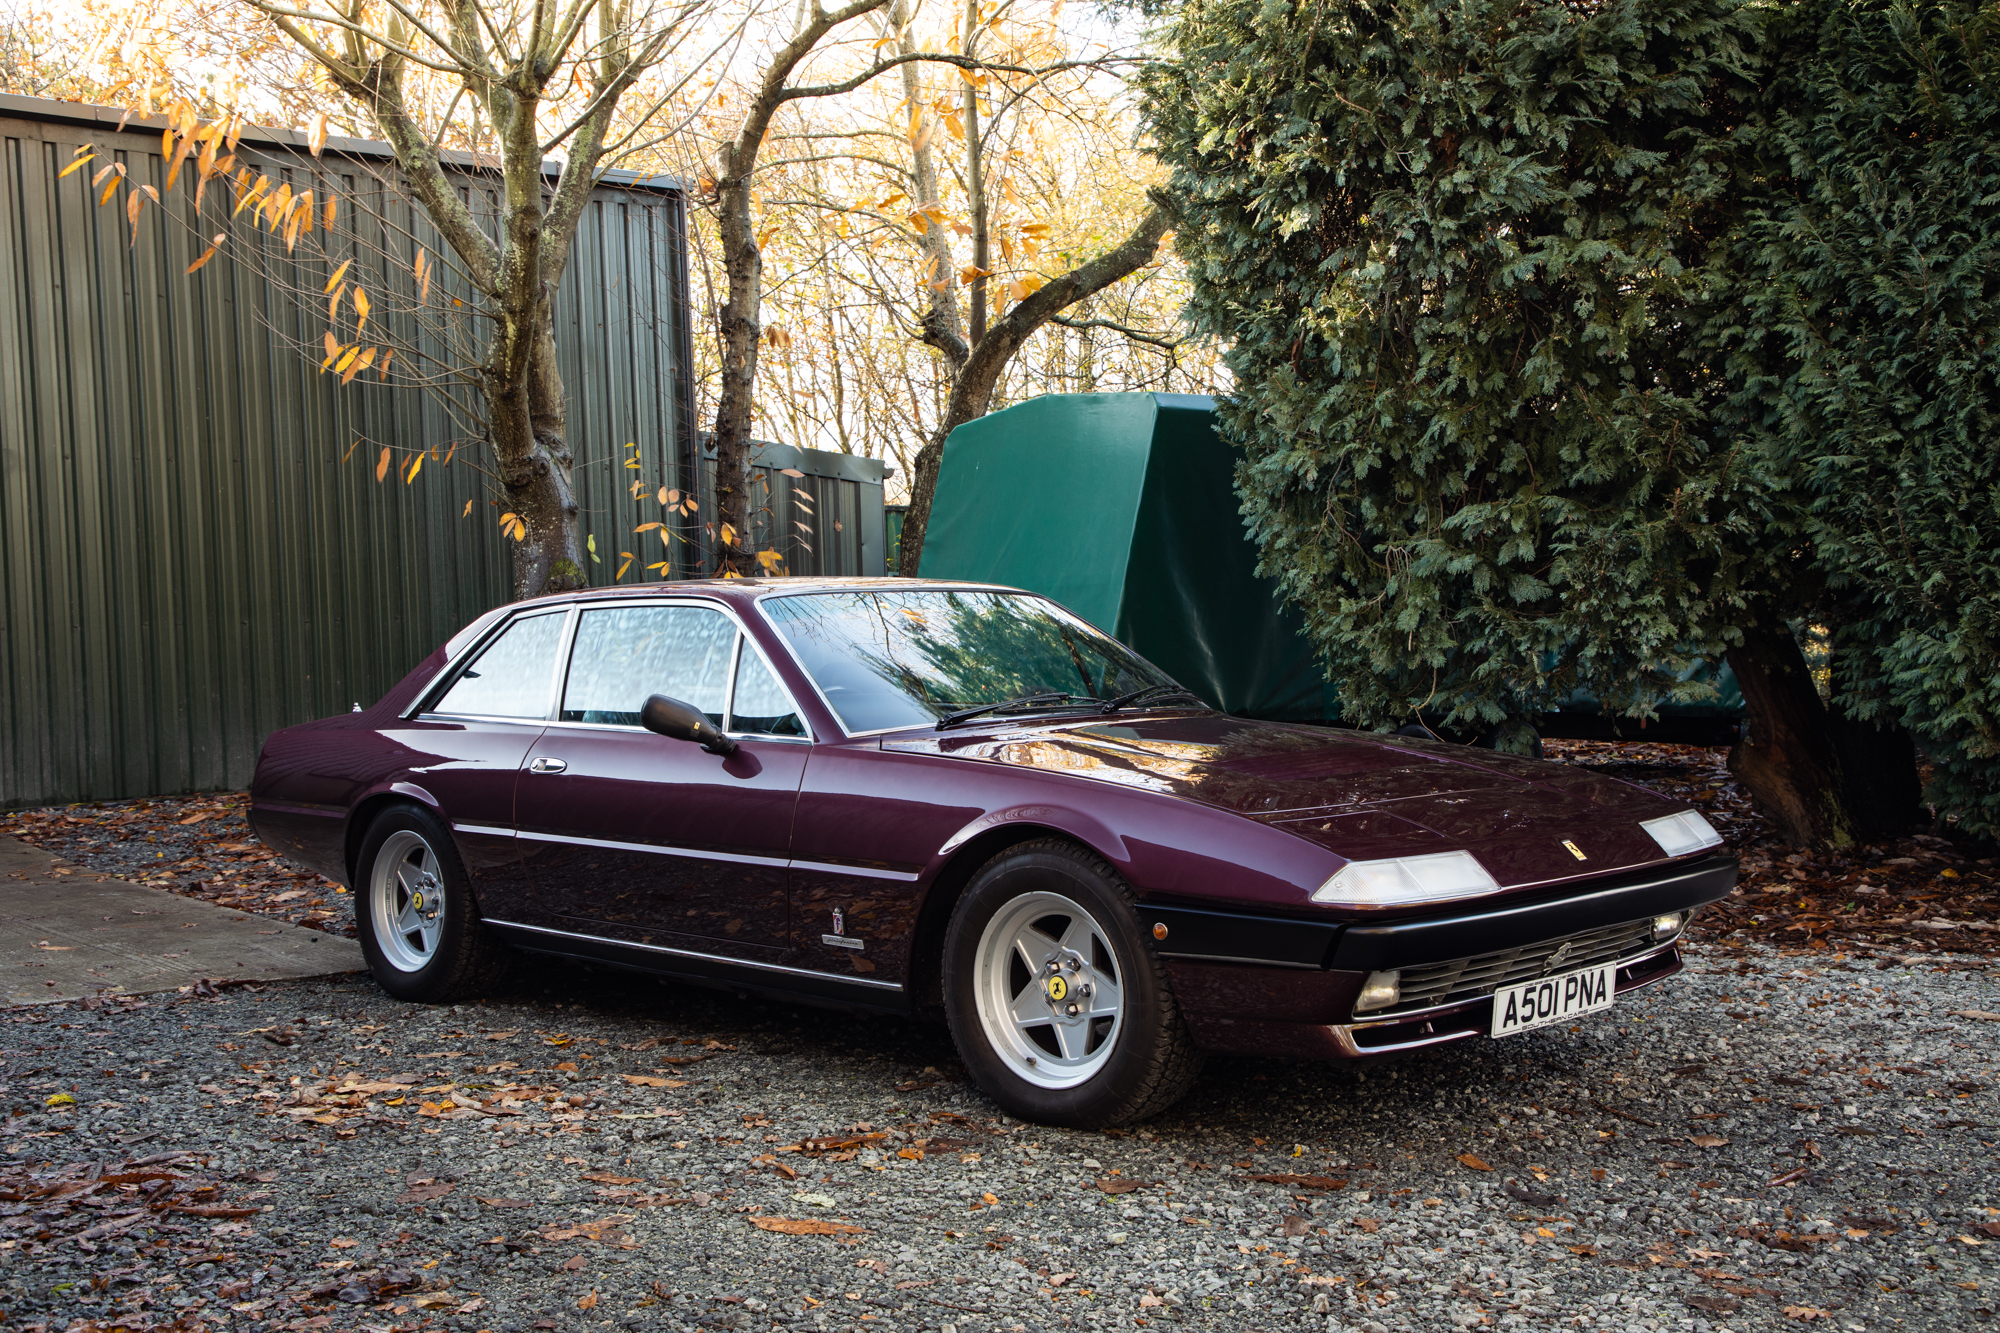 1984 FERRARI 400I AUTOMATIC for sale by auction in Welwyn, United